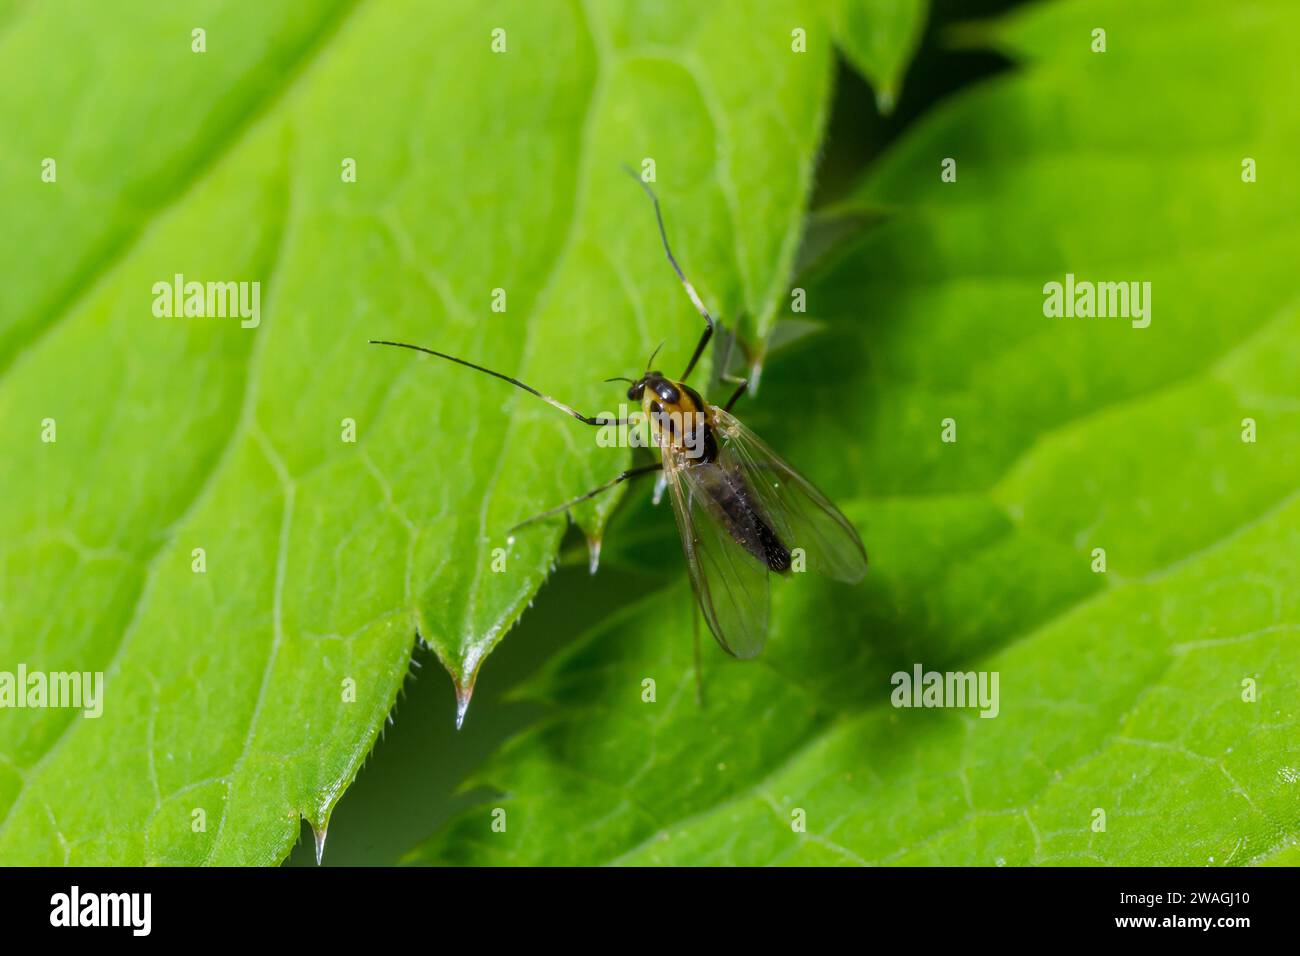 species of pest fly from the family Chloropidae. It is also known as the chloropid gout fly or barley gout fly. It is an oligophagous pest of cereal c Stock Photo